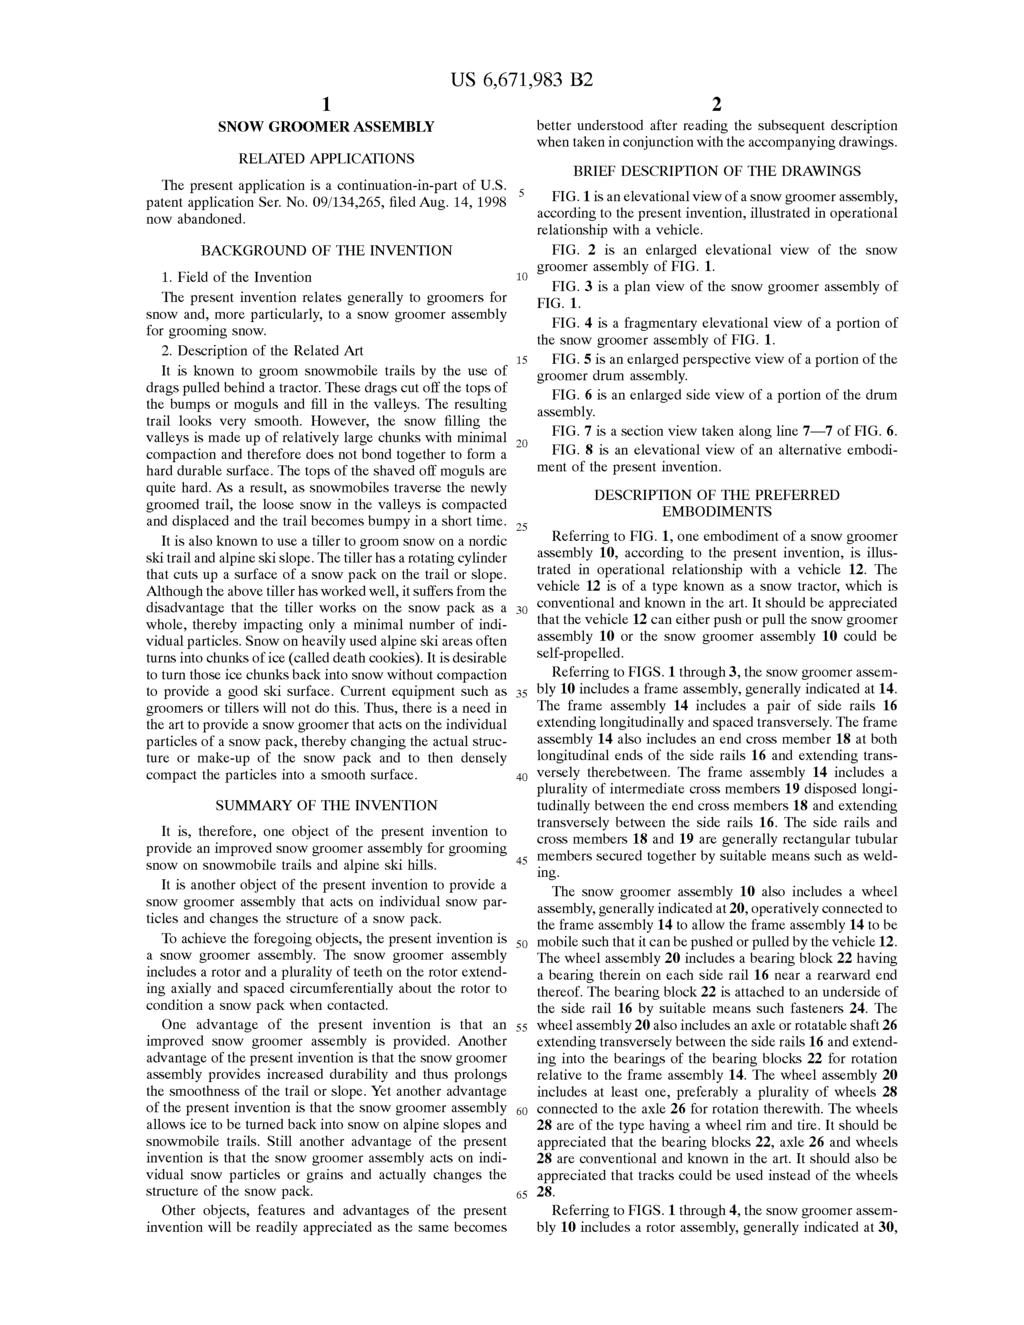 1 SNOW GROOMER ASSEMBLY RELATED APPLICATIONS The present application is a continuation-in-part of U.S. patent application Ser. No. 09/134,265, filed Aug. 14, 1998 now abandoned.